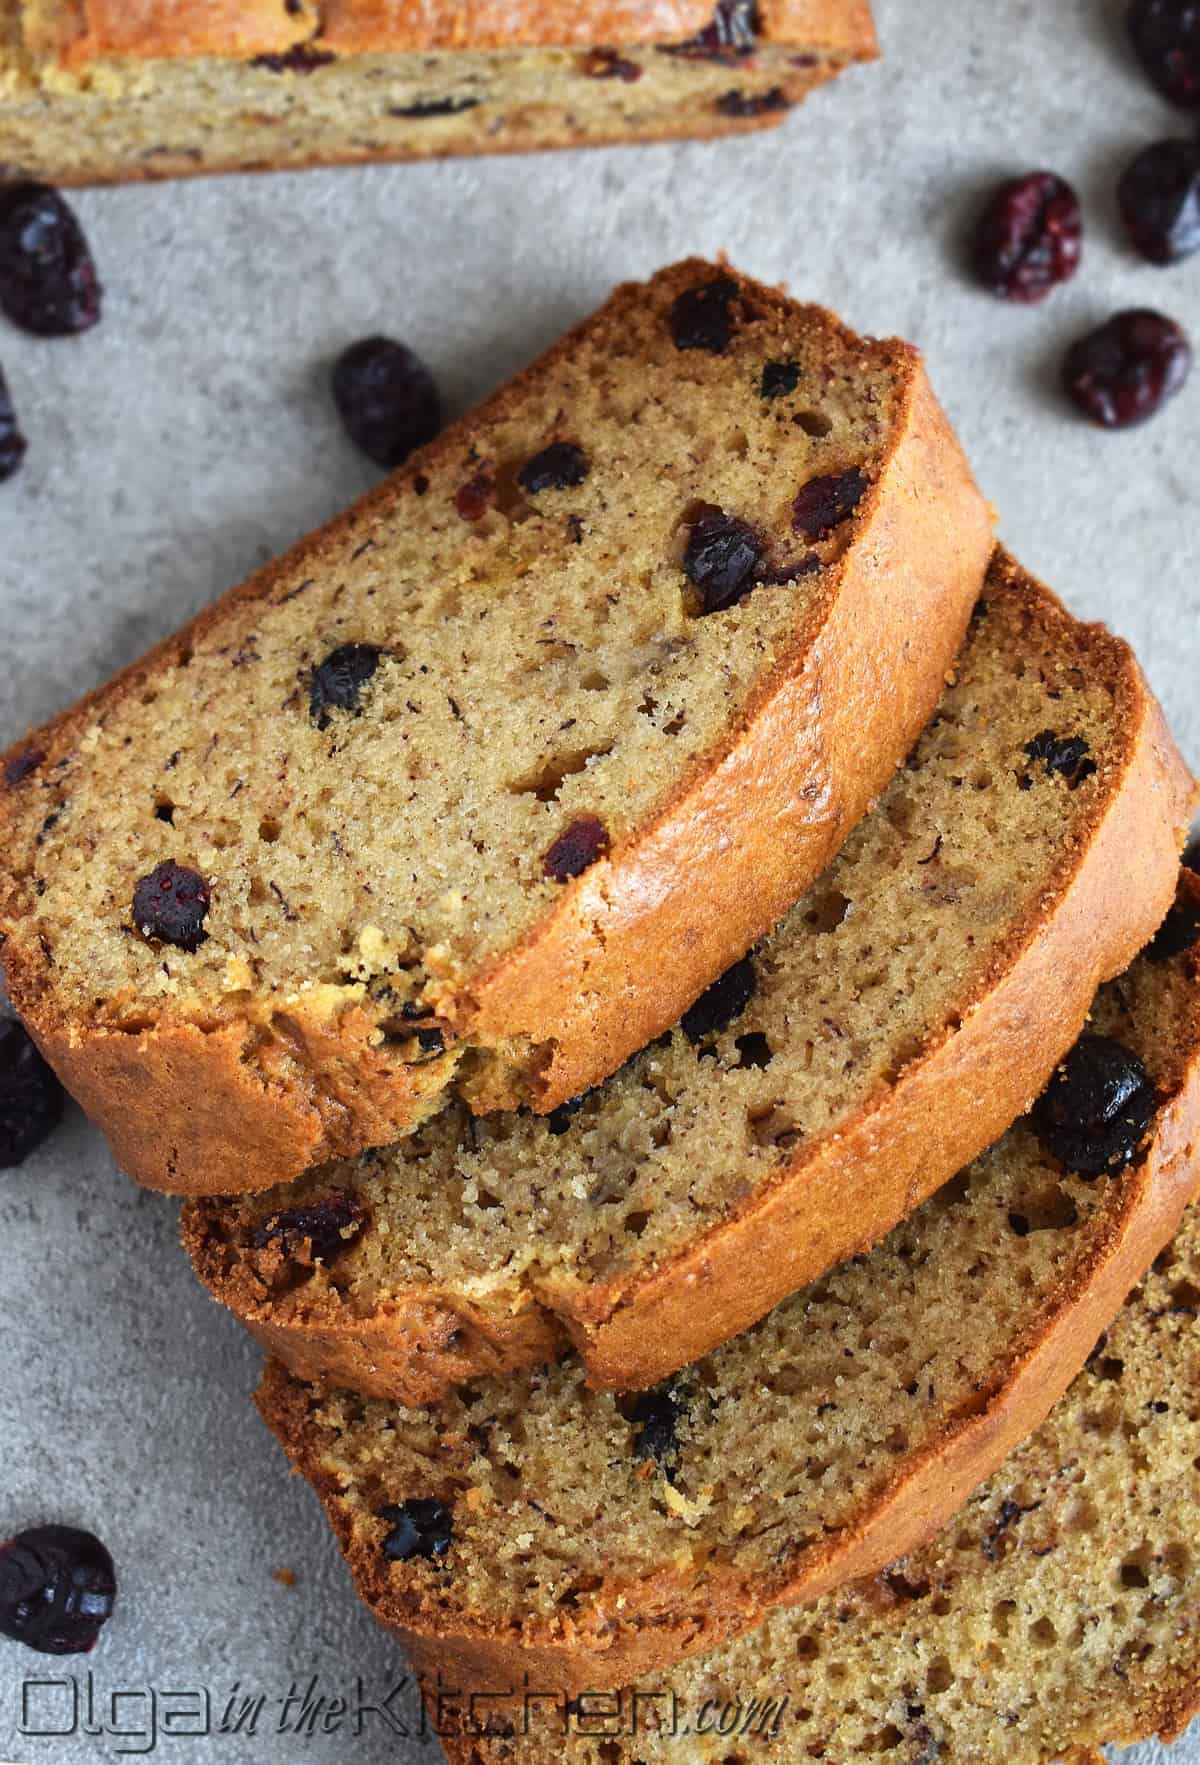 Cranberry Banana Bread is perfectly moist, slightly sweet and loaded with sweet tangy cranberries. This wonderfully moist and soft banana bread is even better with overripe bananas! #olgainthekitchen #bananabread #cranberrybread #cranberrybananabread #bananacranberrybread #bread #easyrecipe #dessert